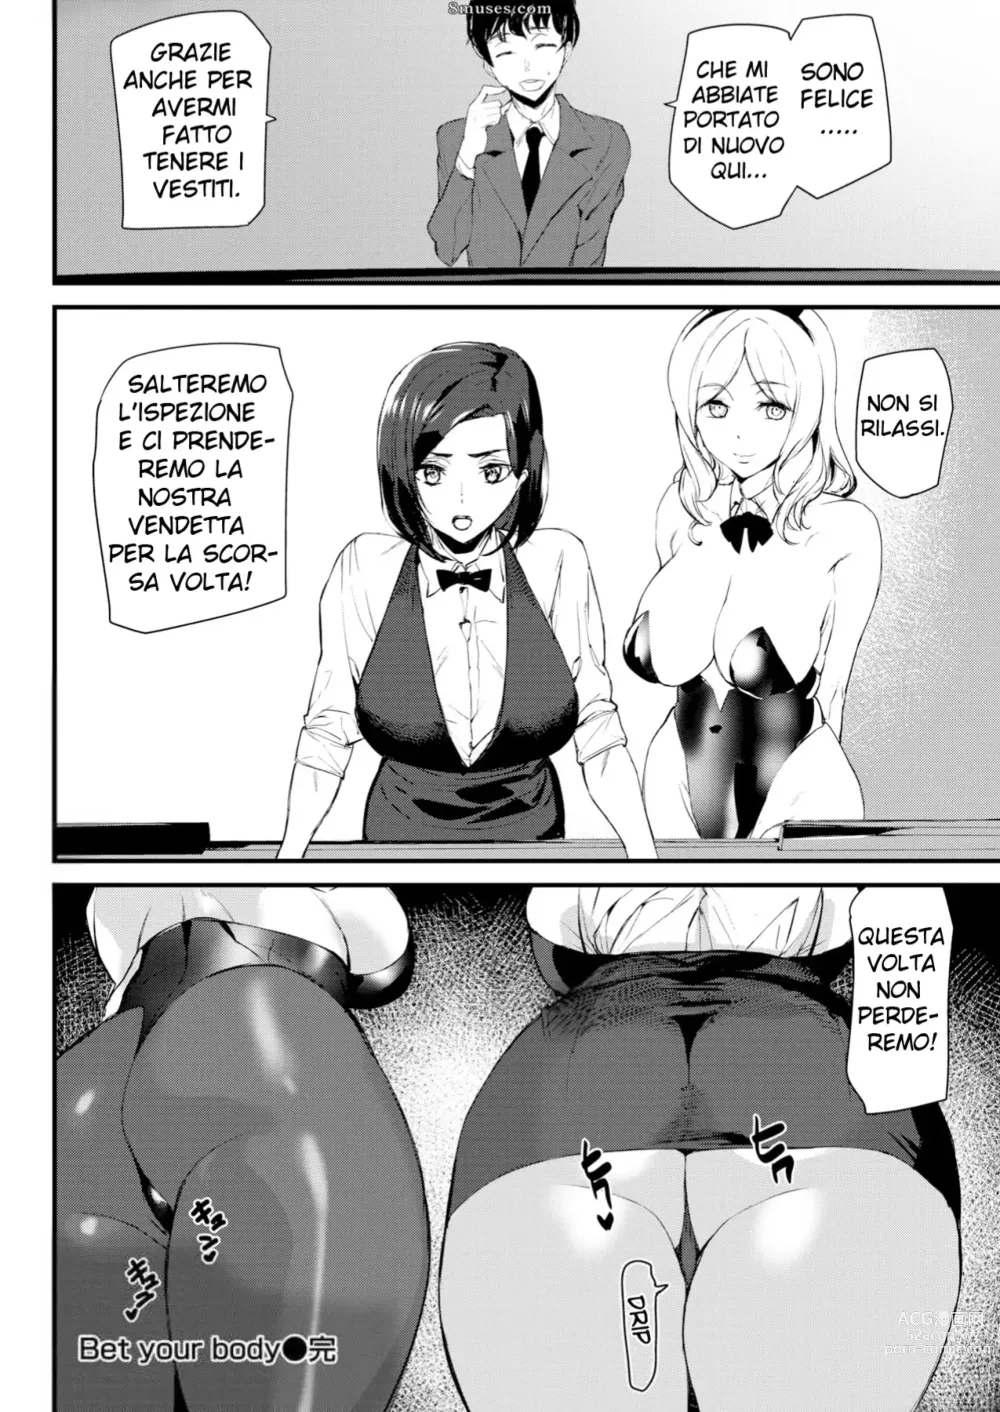 Page 20 of manga Bet your body